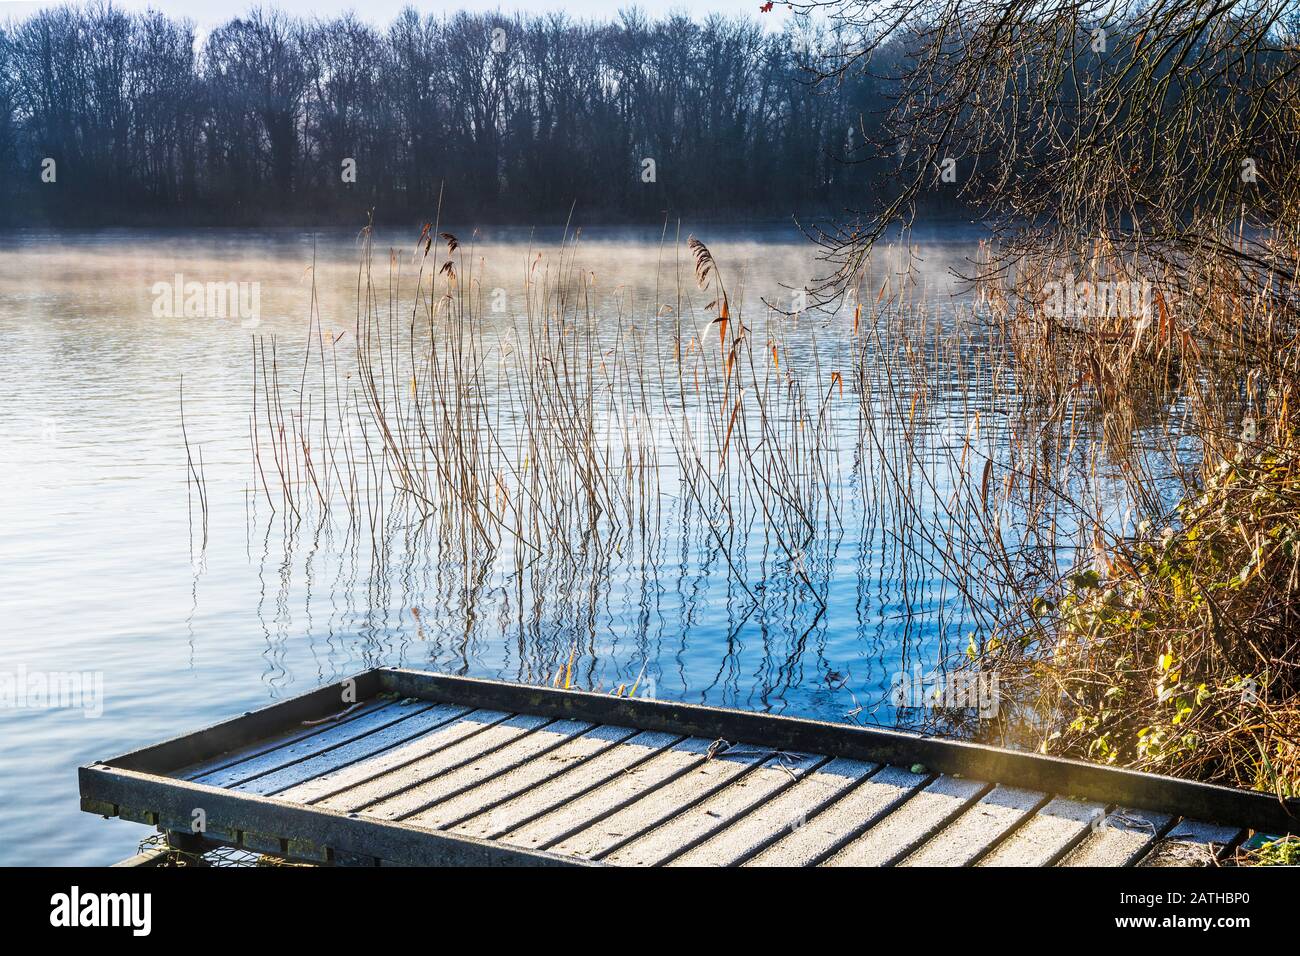 A cold, sunny winter's morning on Coate Water in Swindon. Stock Photo